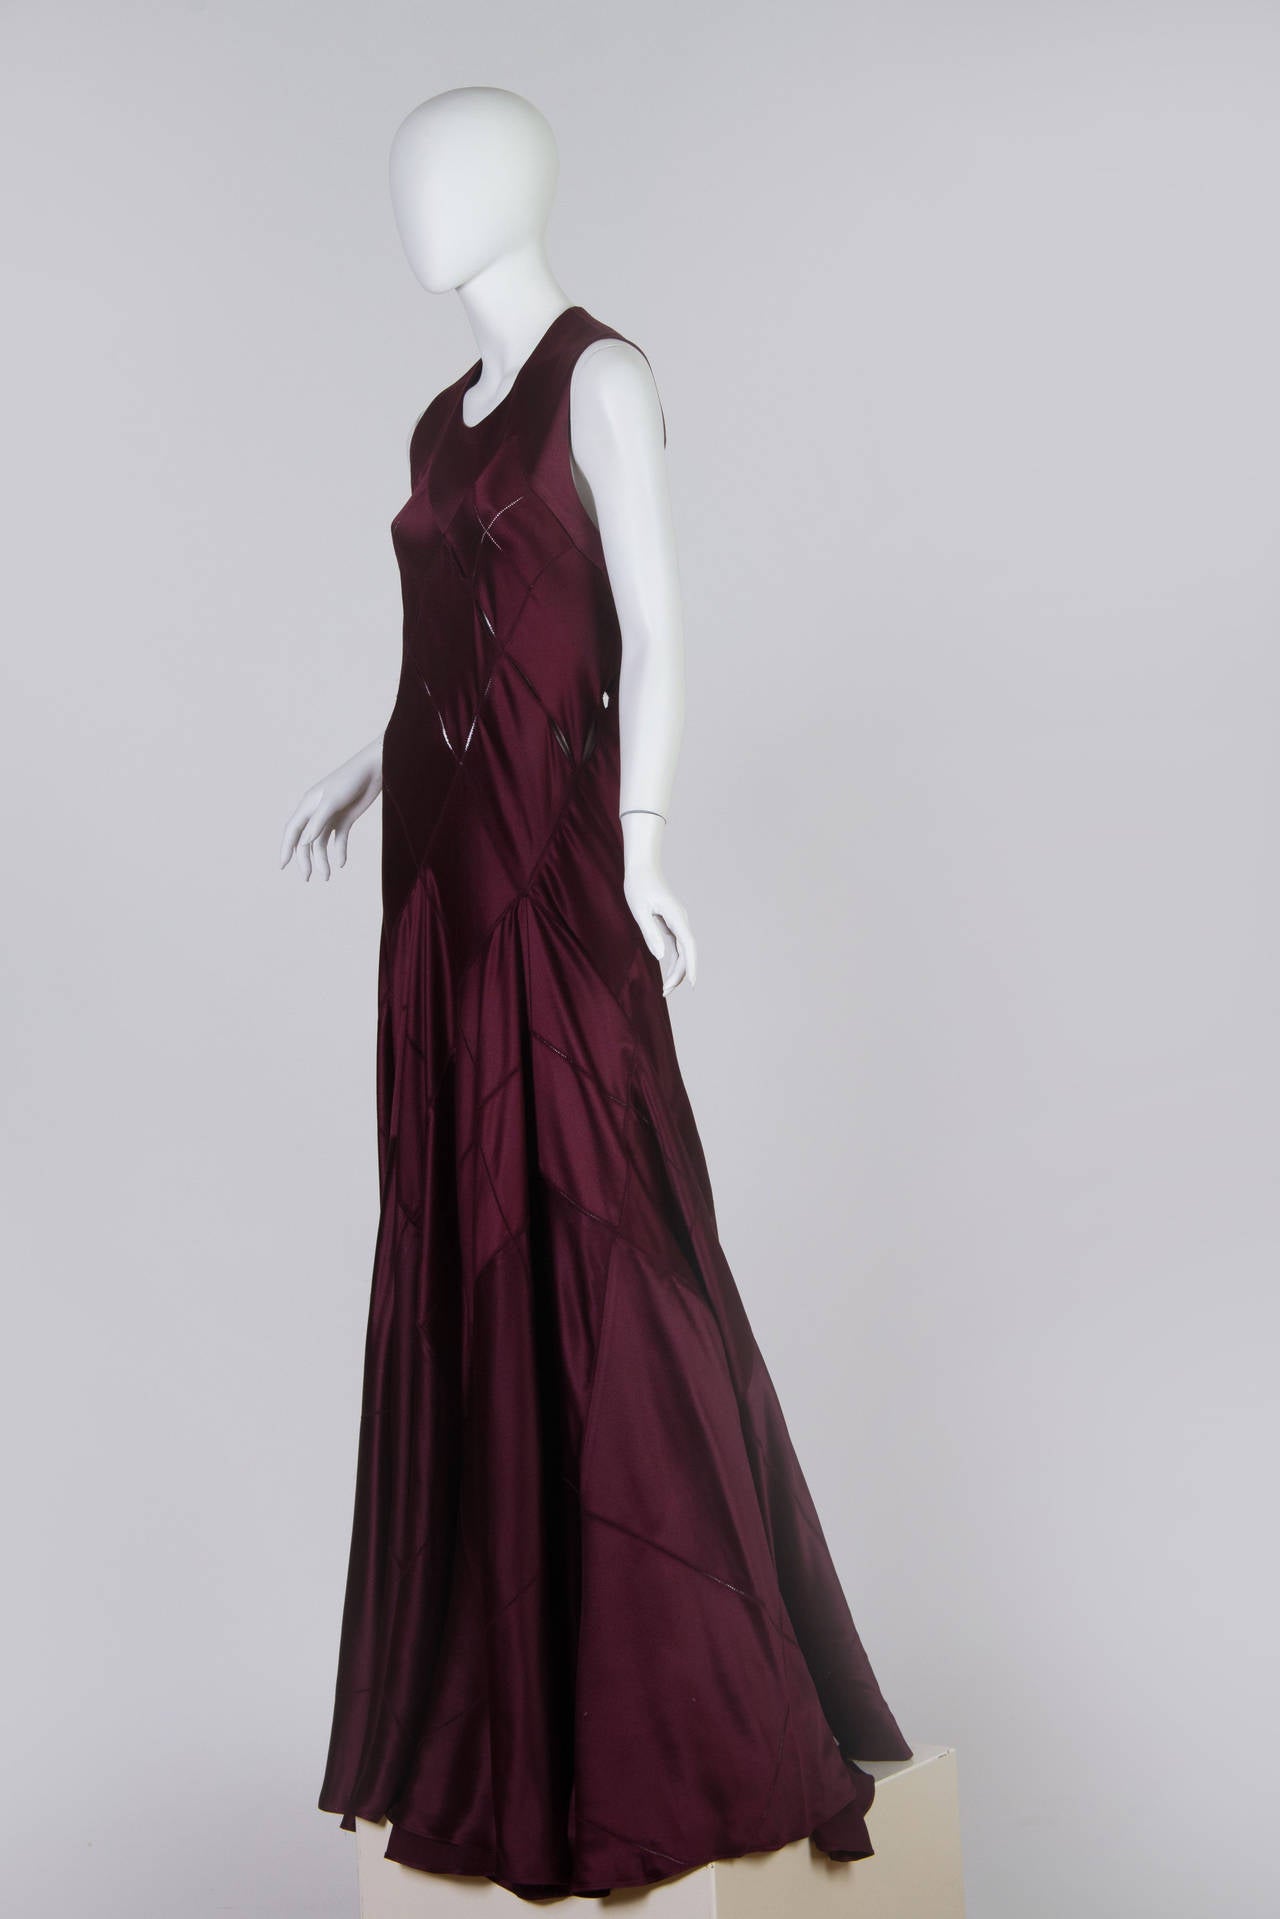 2000S CALVIN KLEIN Burgundy Bias Cut Silk Crepe Back Satin Patchwork Cut-Out Gown With Very Full Skirt